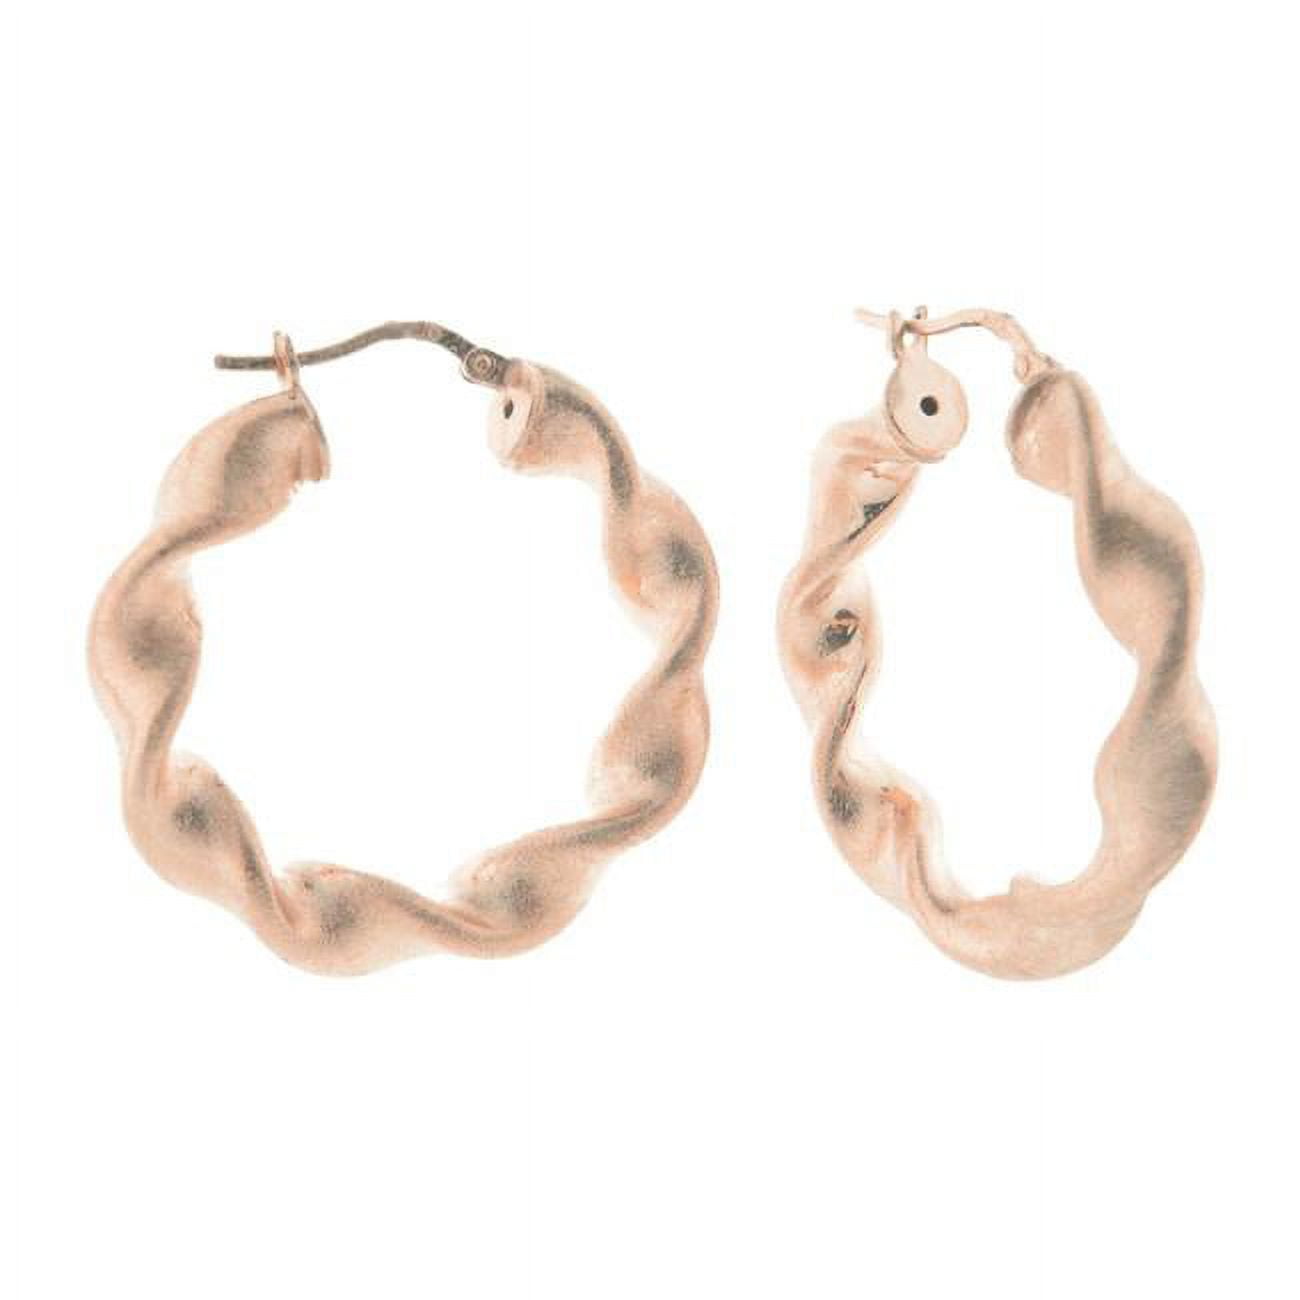 405243p Satin Finish Twisted Hoop Earrings In Rose Gold Sterling Silver